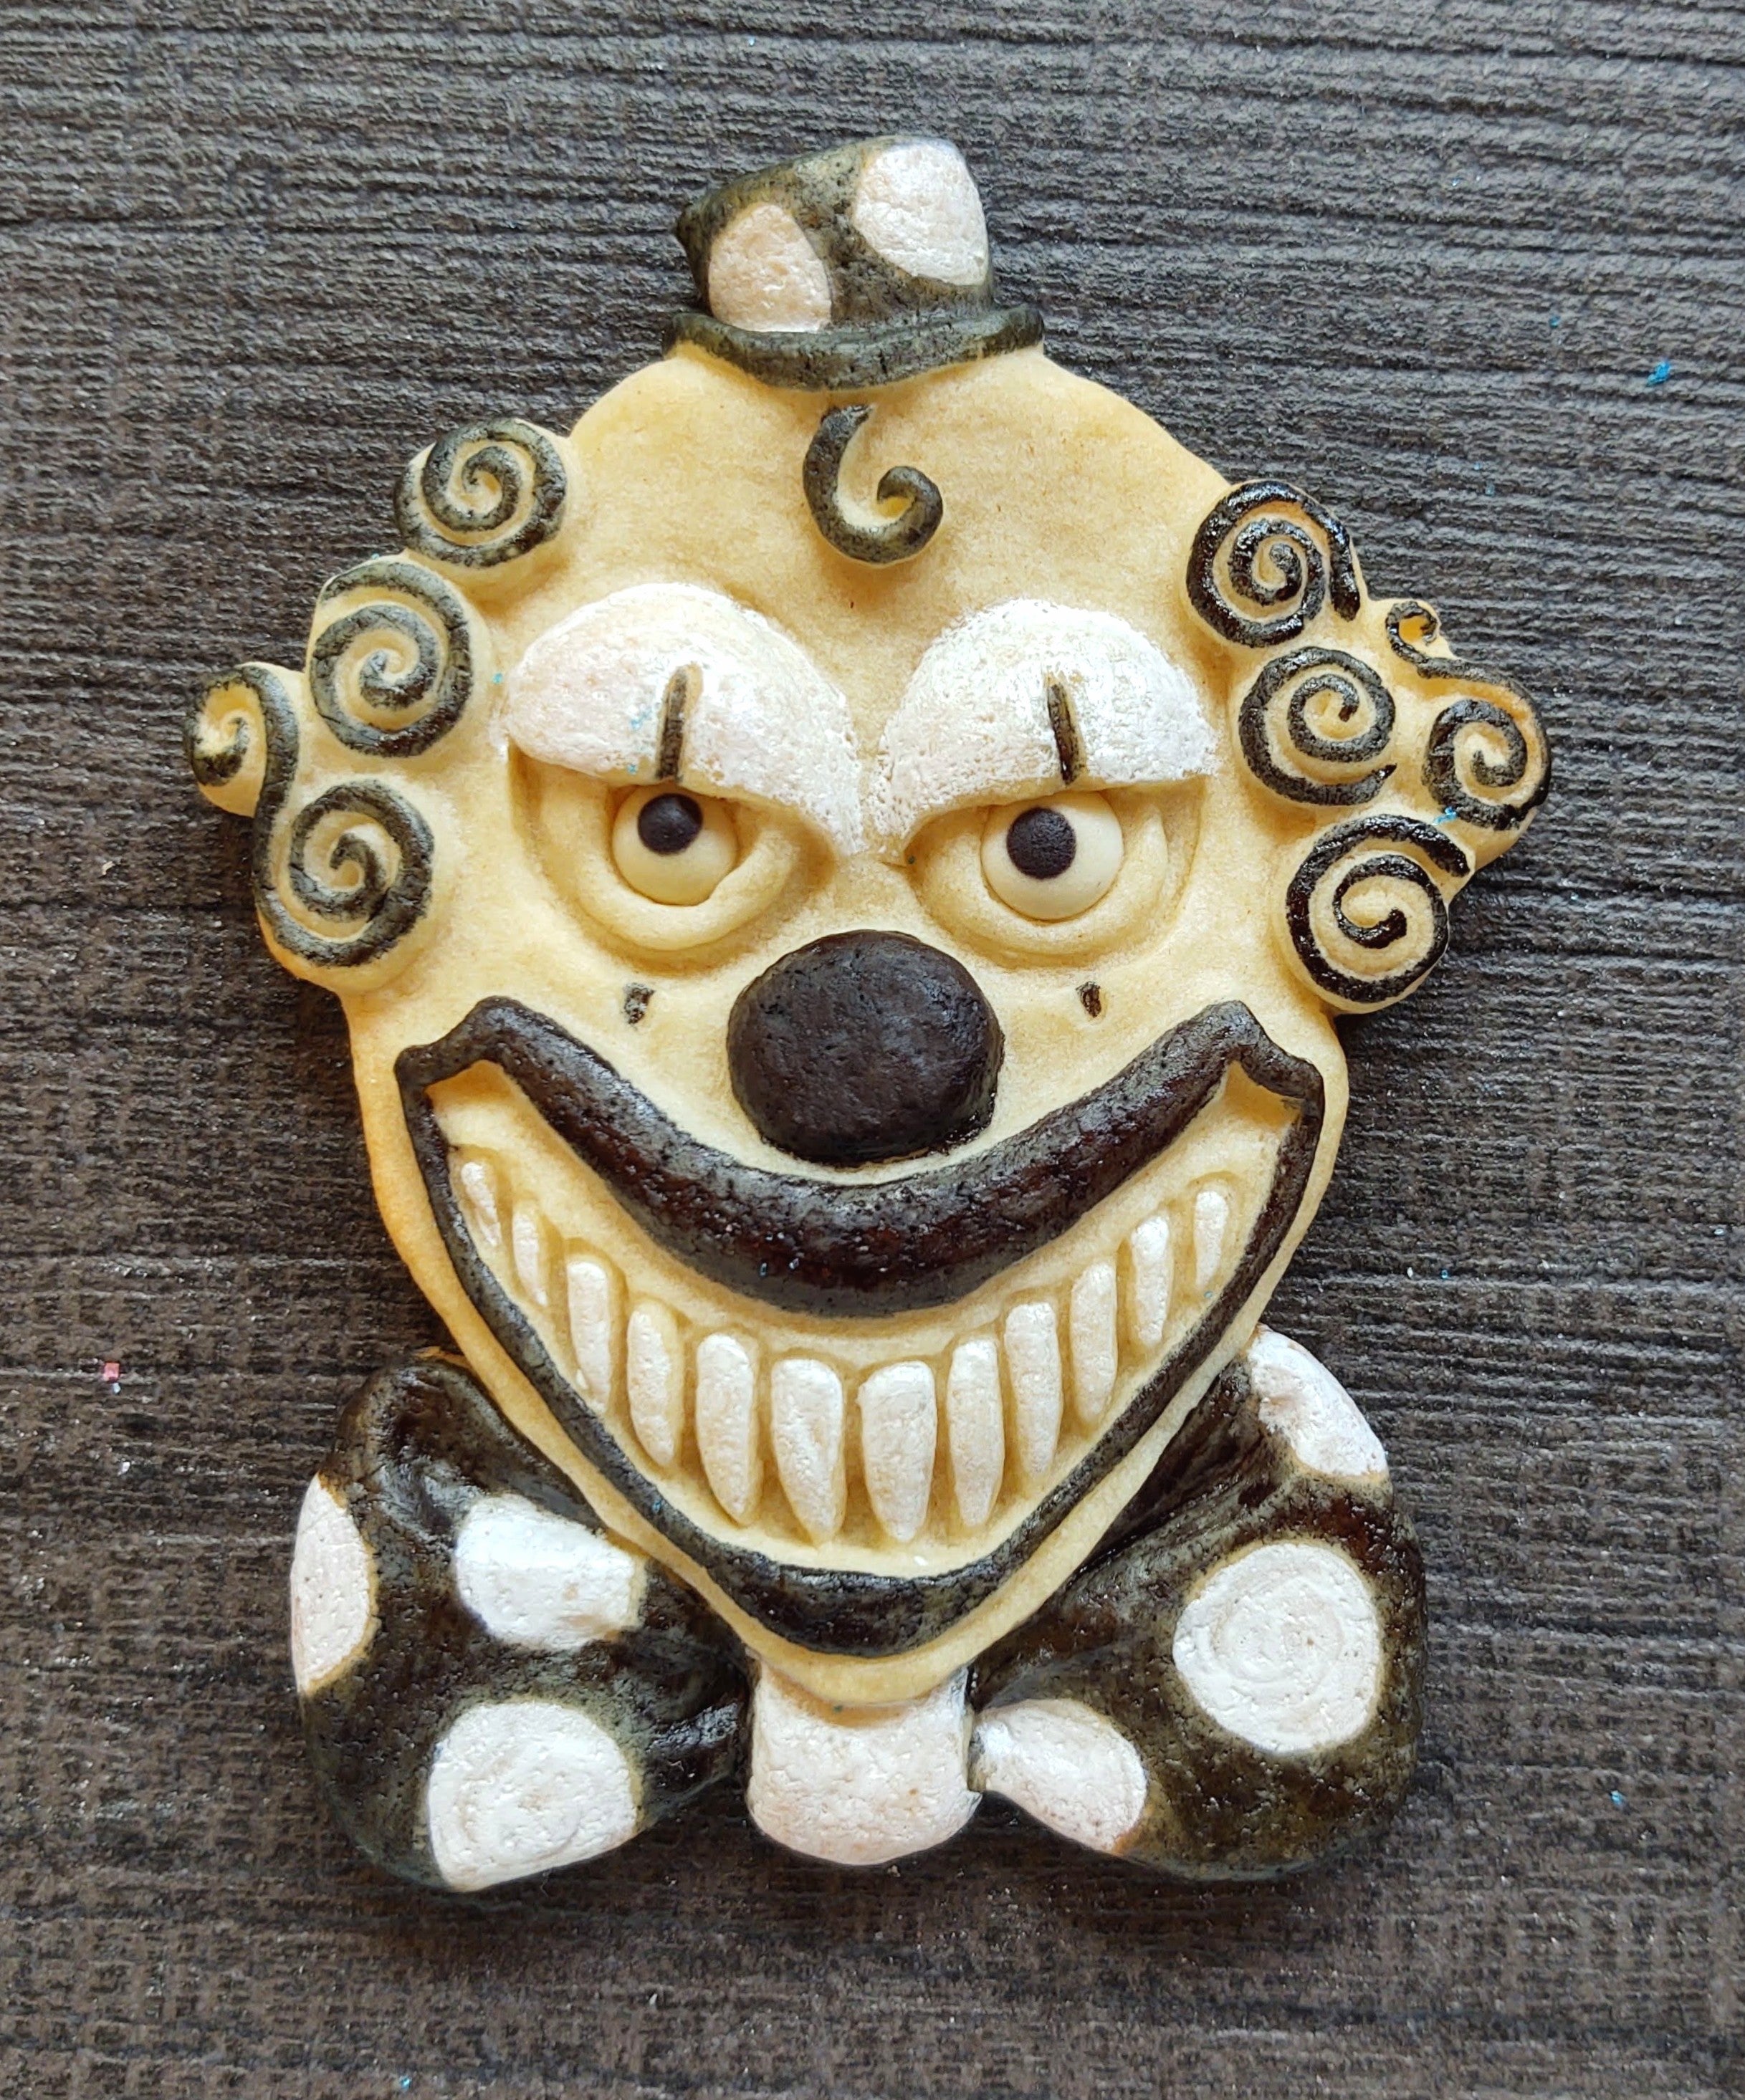 Creepy Clown Silicone Cookie Mold